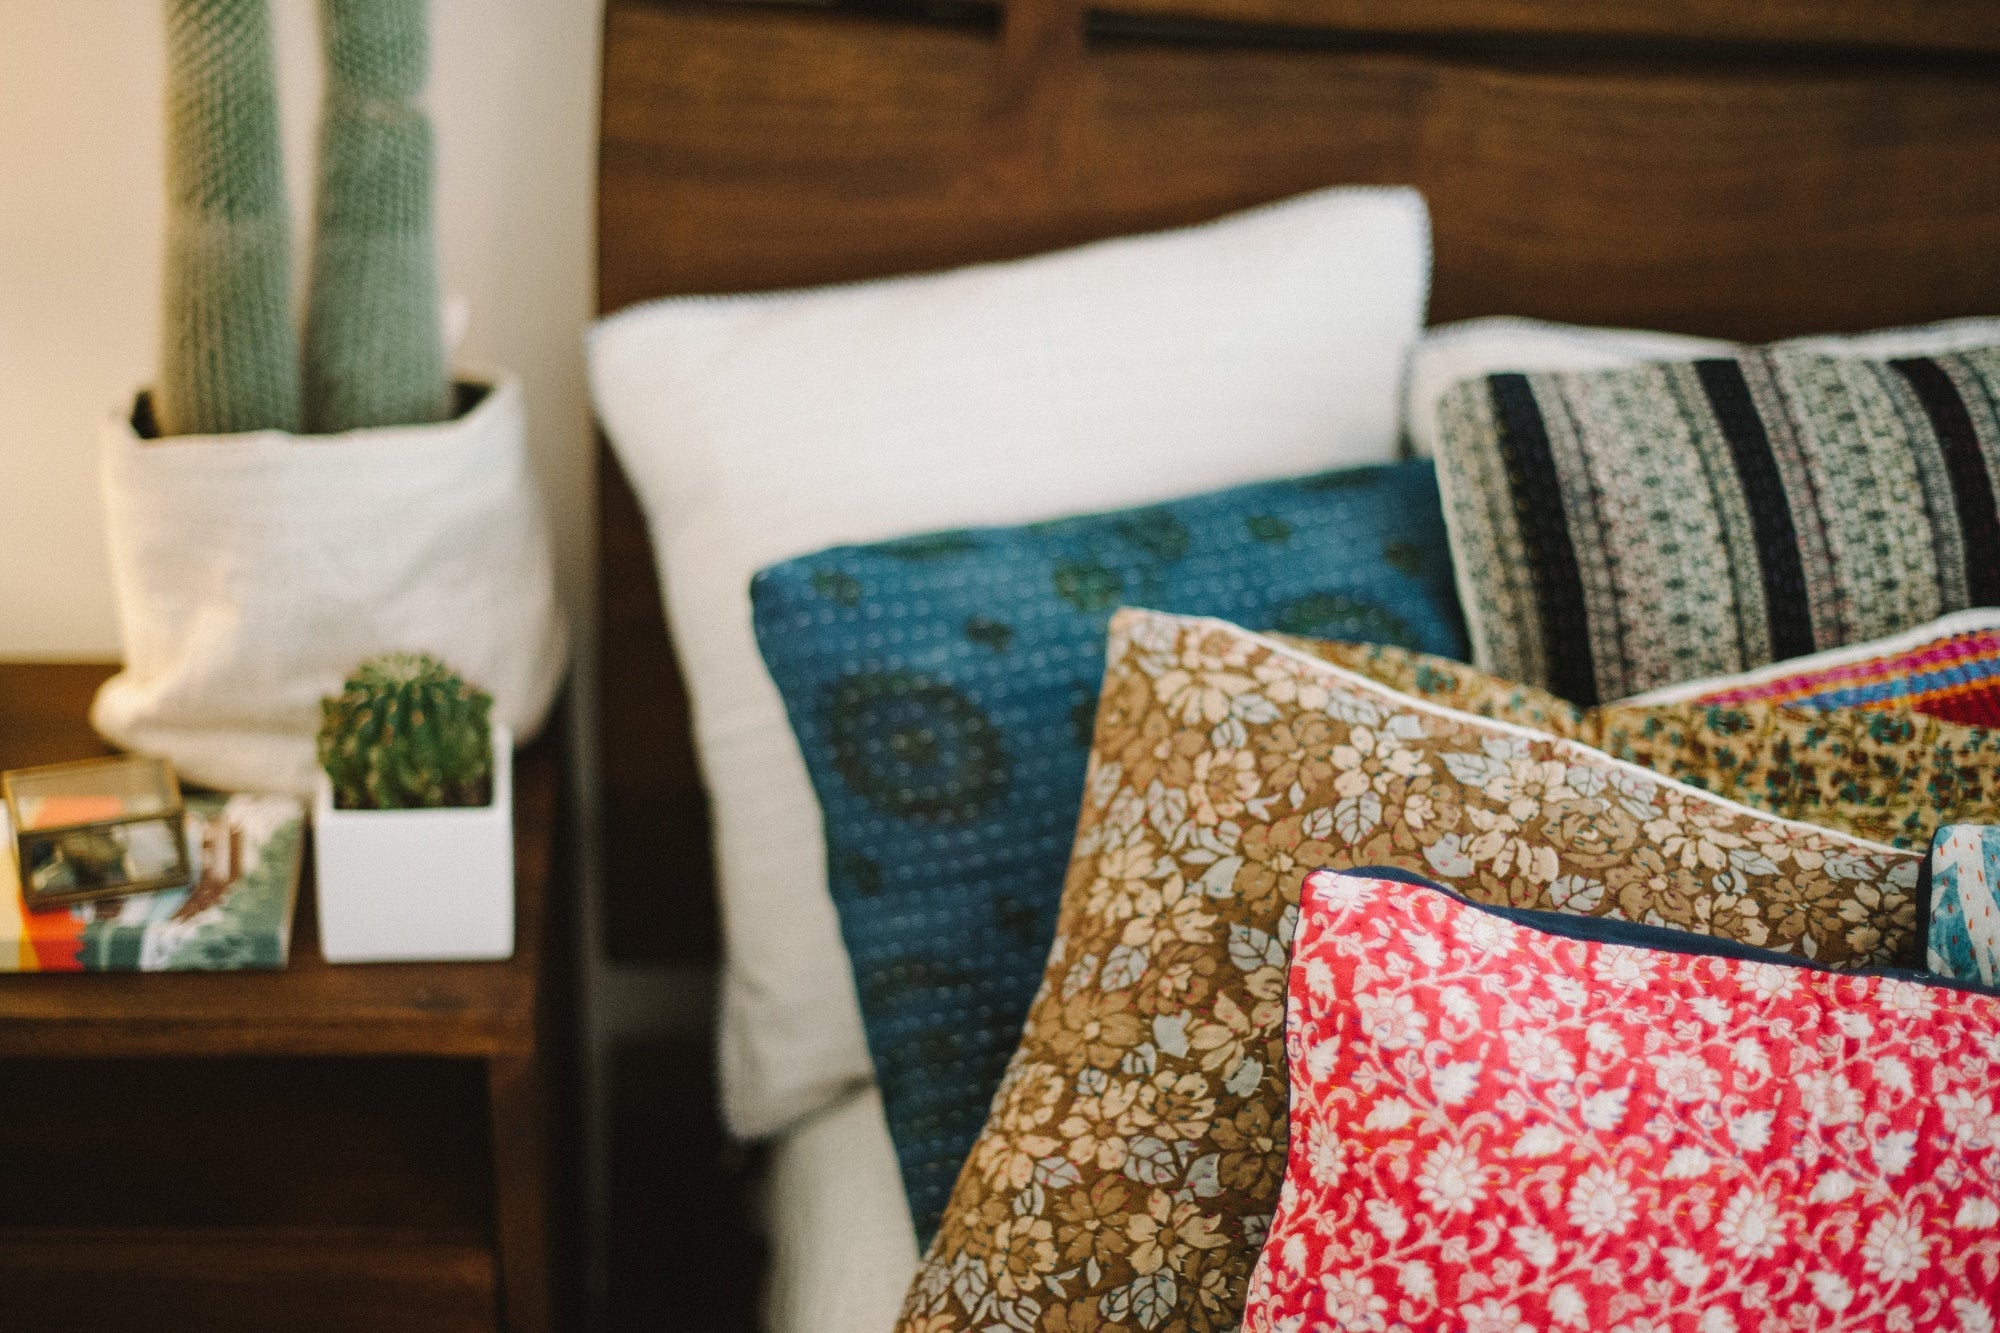 Restore no. 1 Kantha Pillow Cover